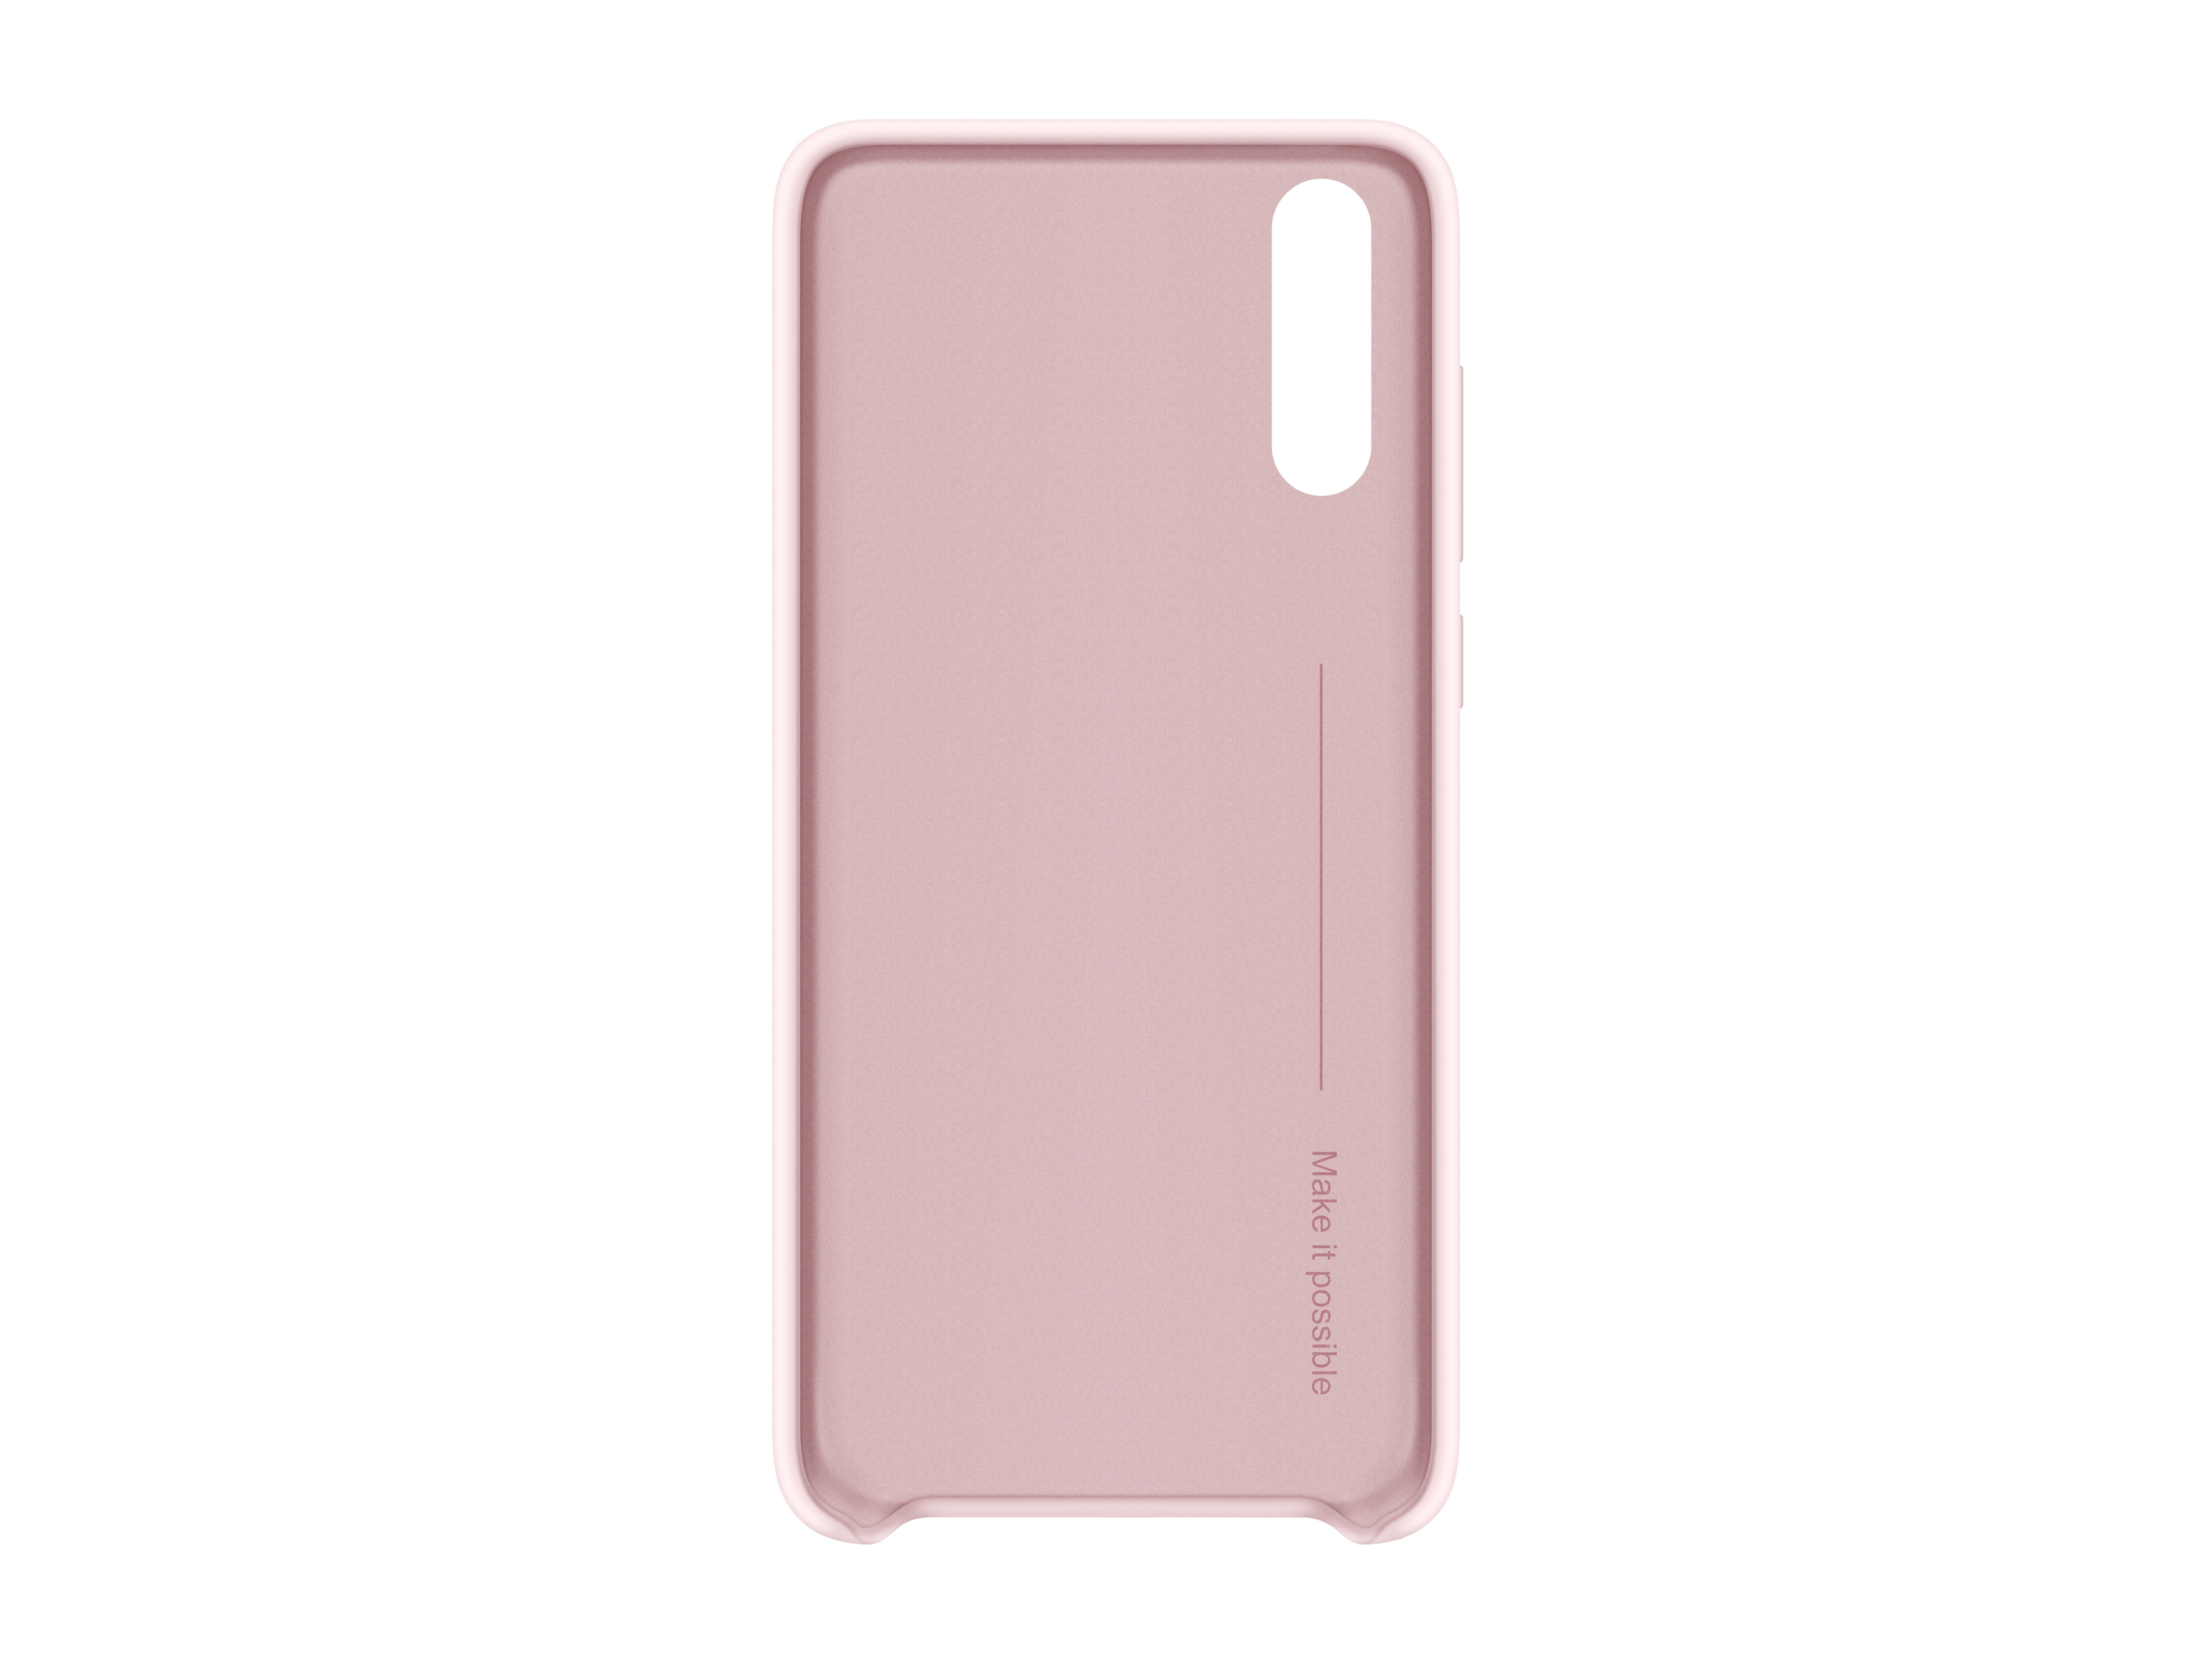 HUAWEI Silicon Case, Backcover, Pink Huawei, P20